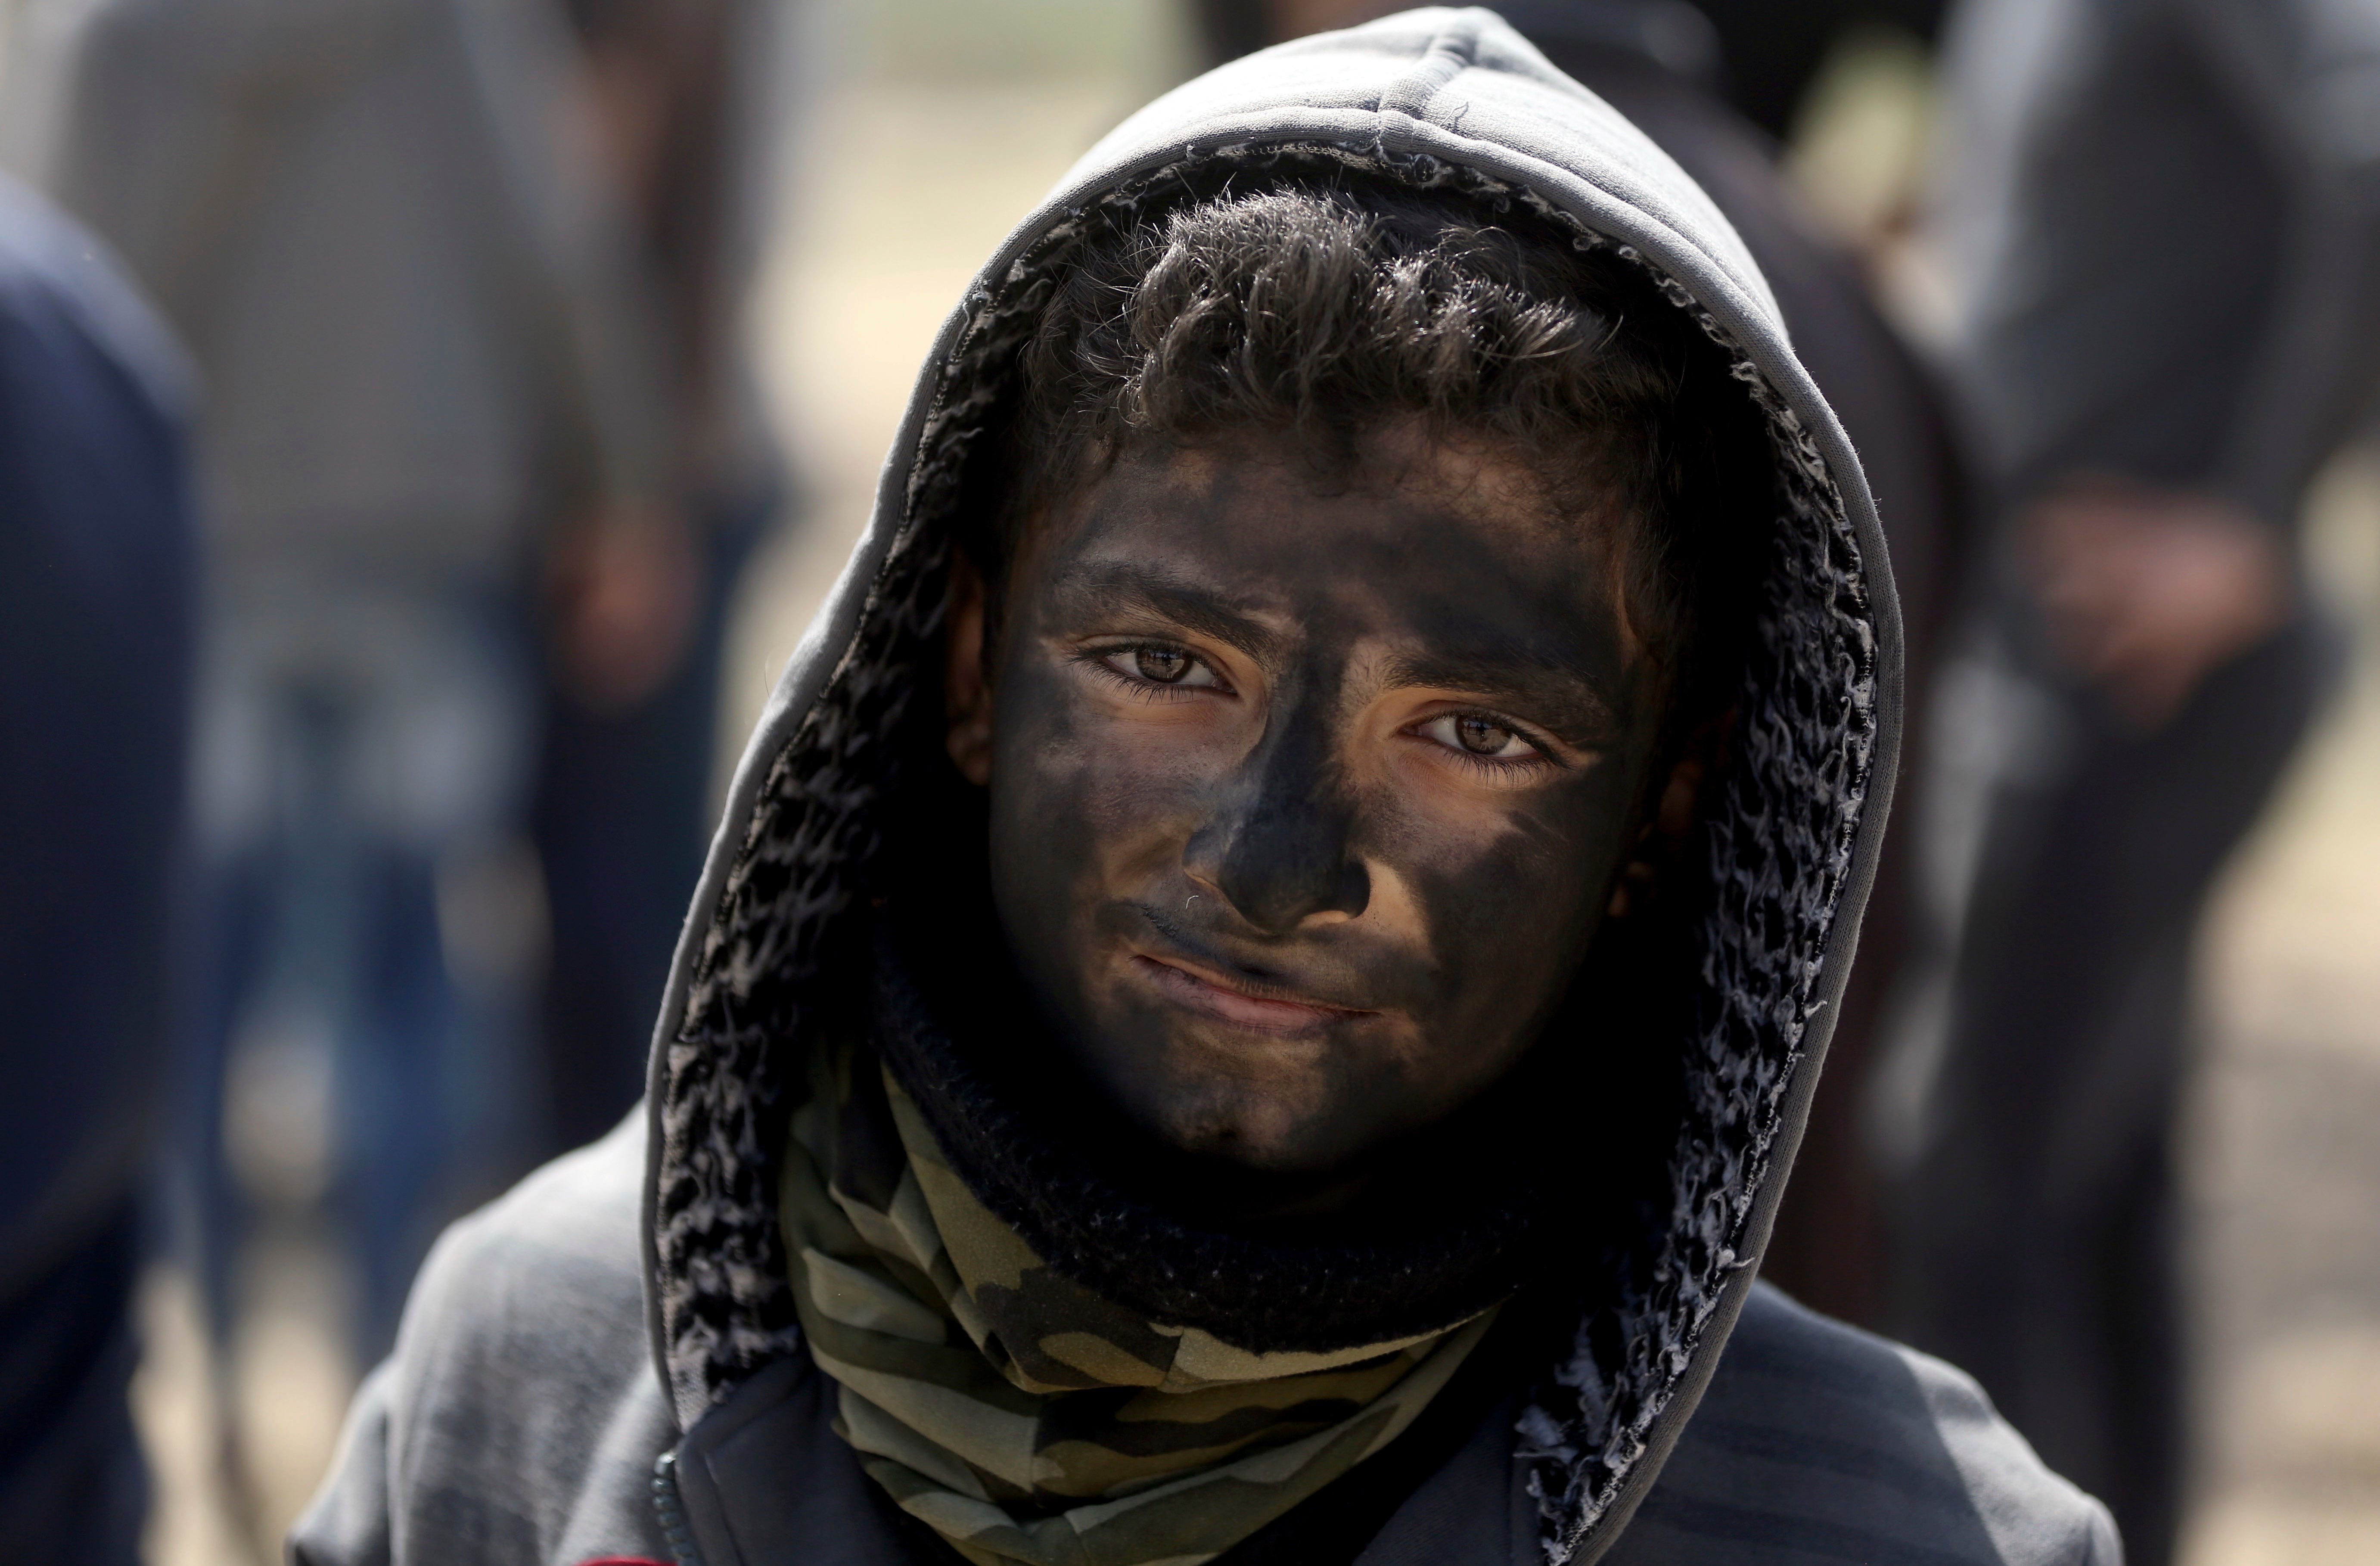 A Palestinian boy poses for a photograph as he paints his face in black during a protest at the Gaza Strip's border with Israel.